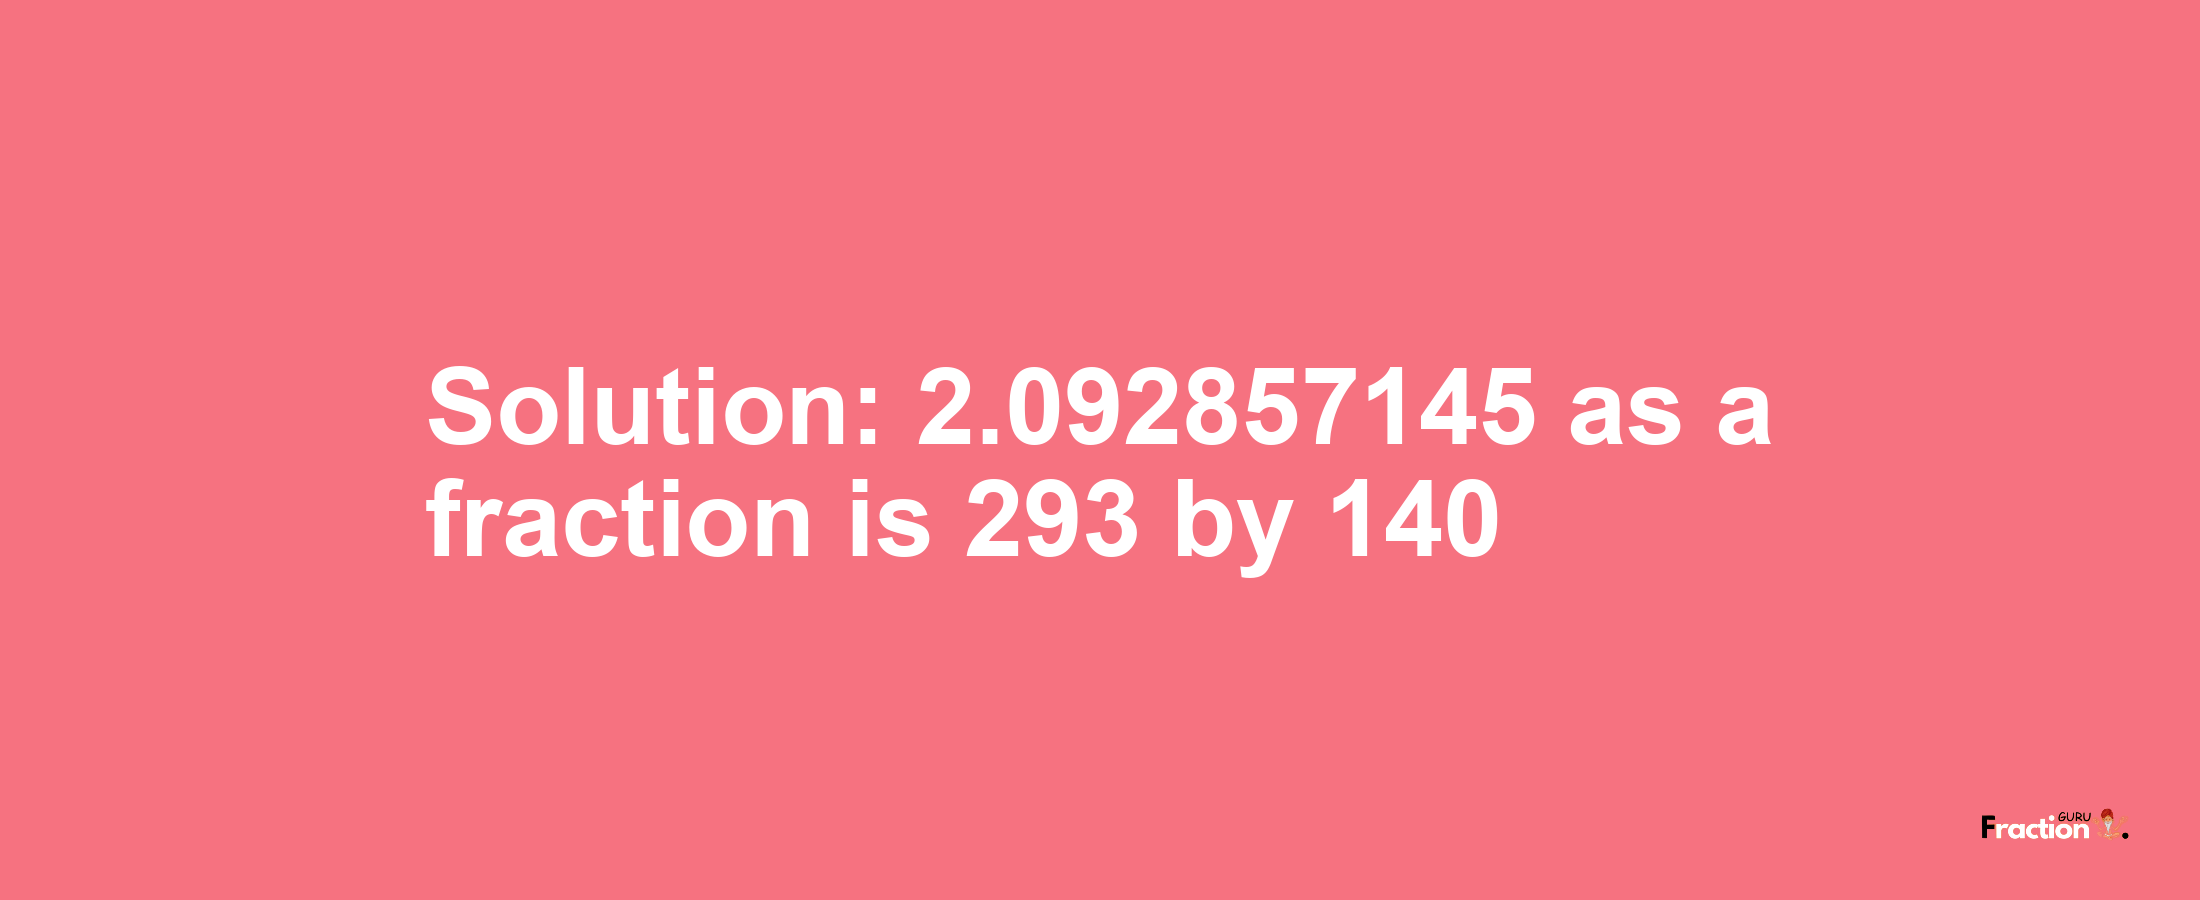 Solution:2.092857145 as a fraction is 293/140